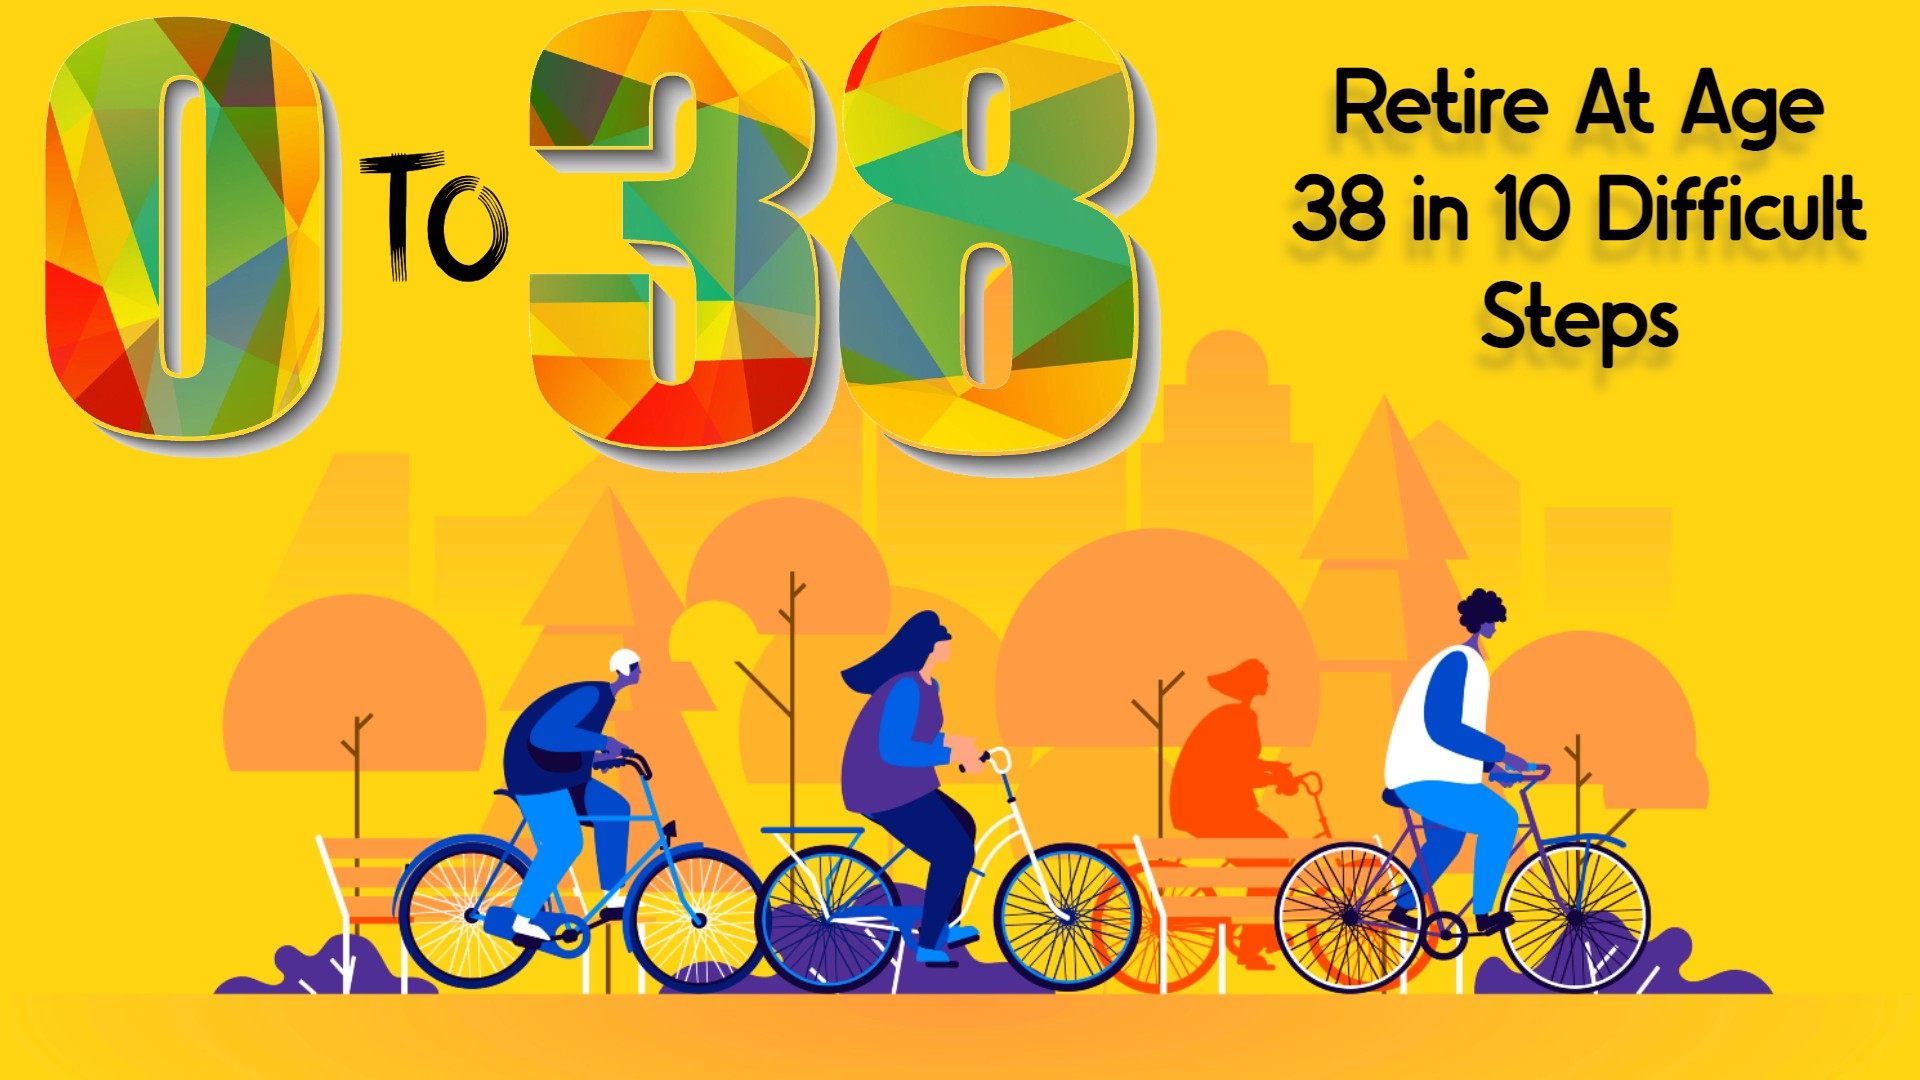 Zero to 38: Retire by Age 38 in 10 Difficult Steps